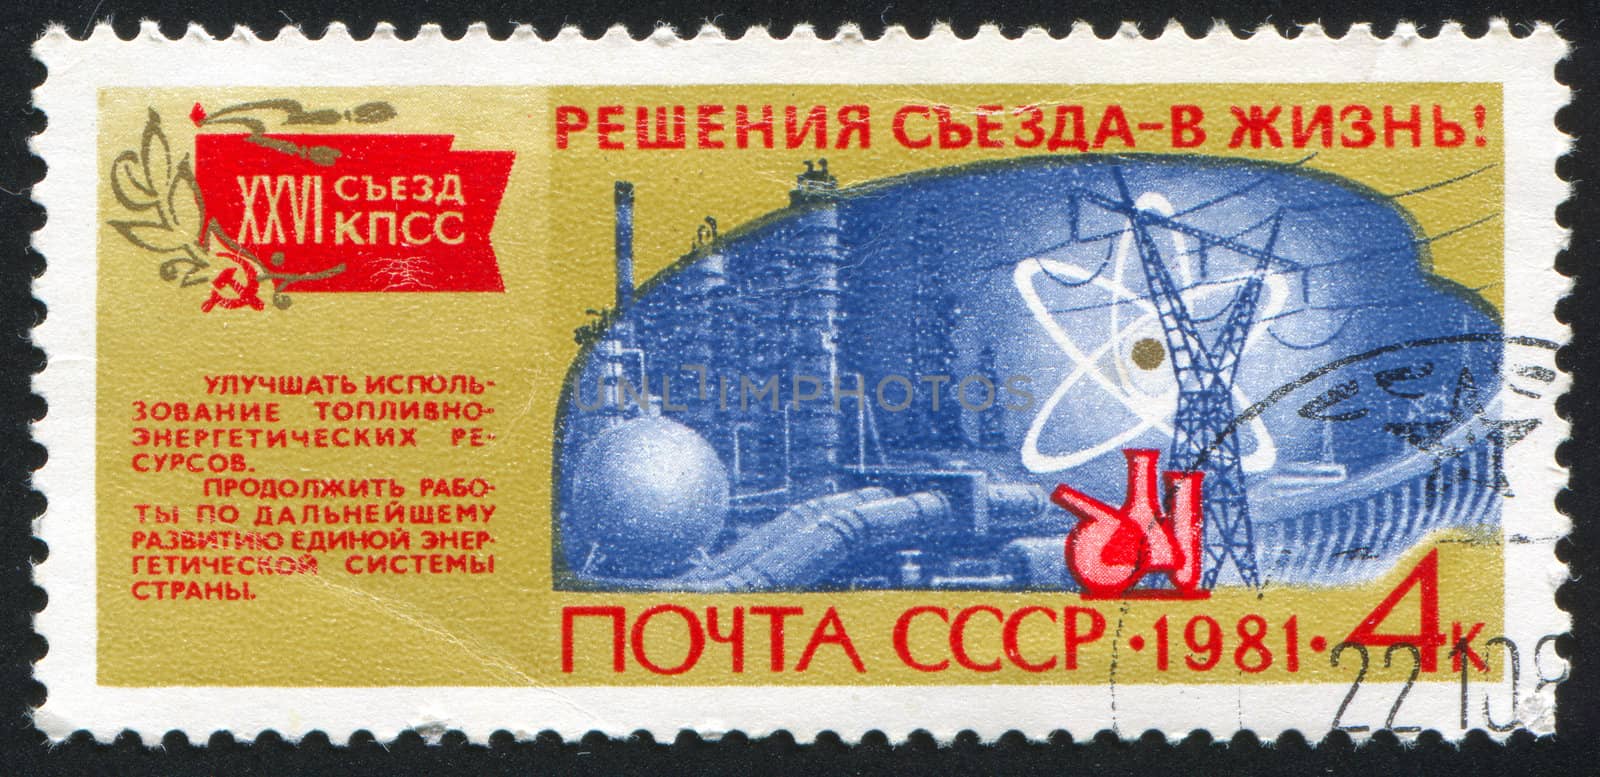 RUSSIA - CIRCA 1981: stamp printed by Russia, shows 26th Party Congress Resolutions, Energy, circa 1981